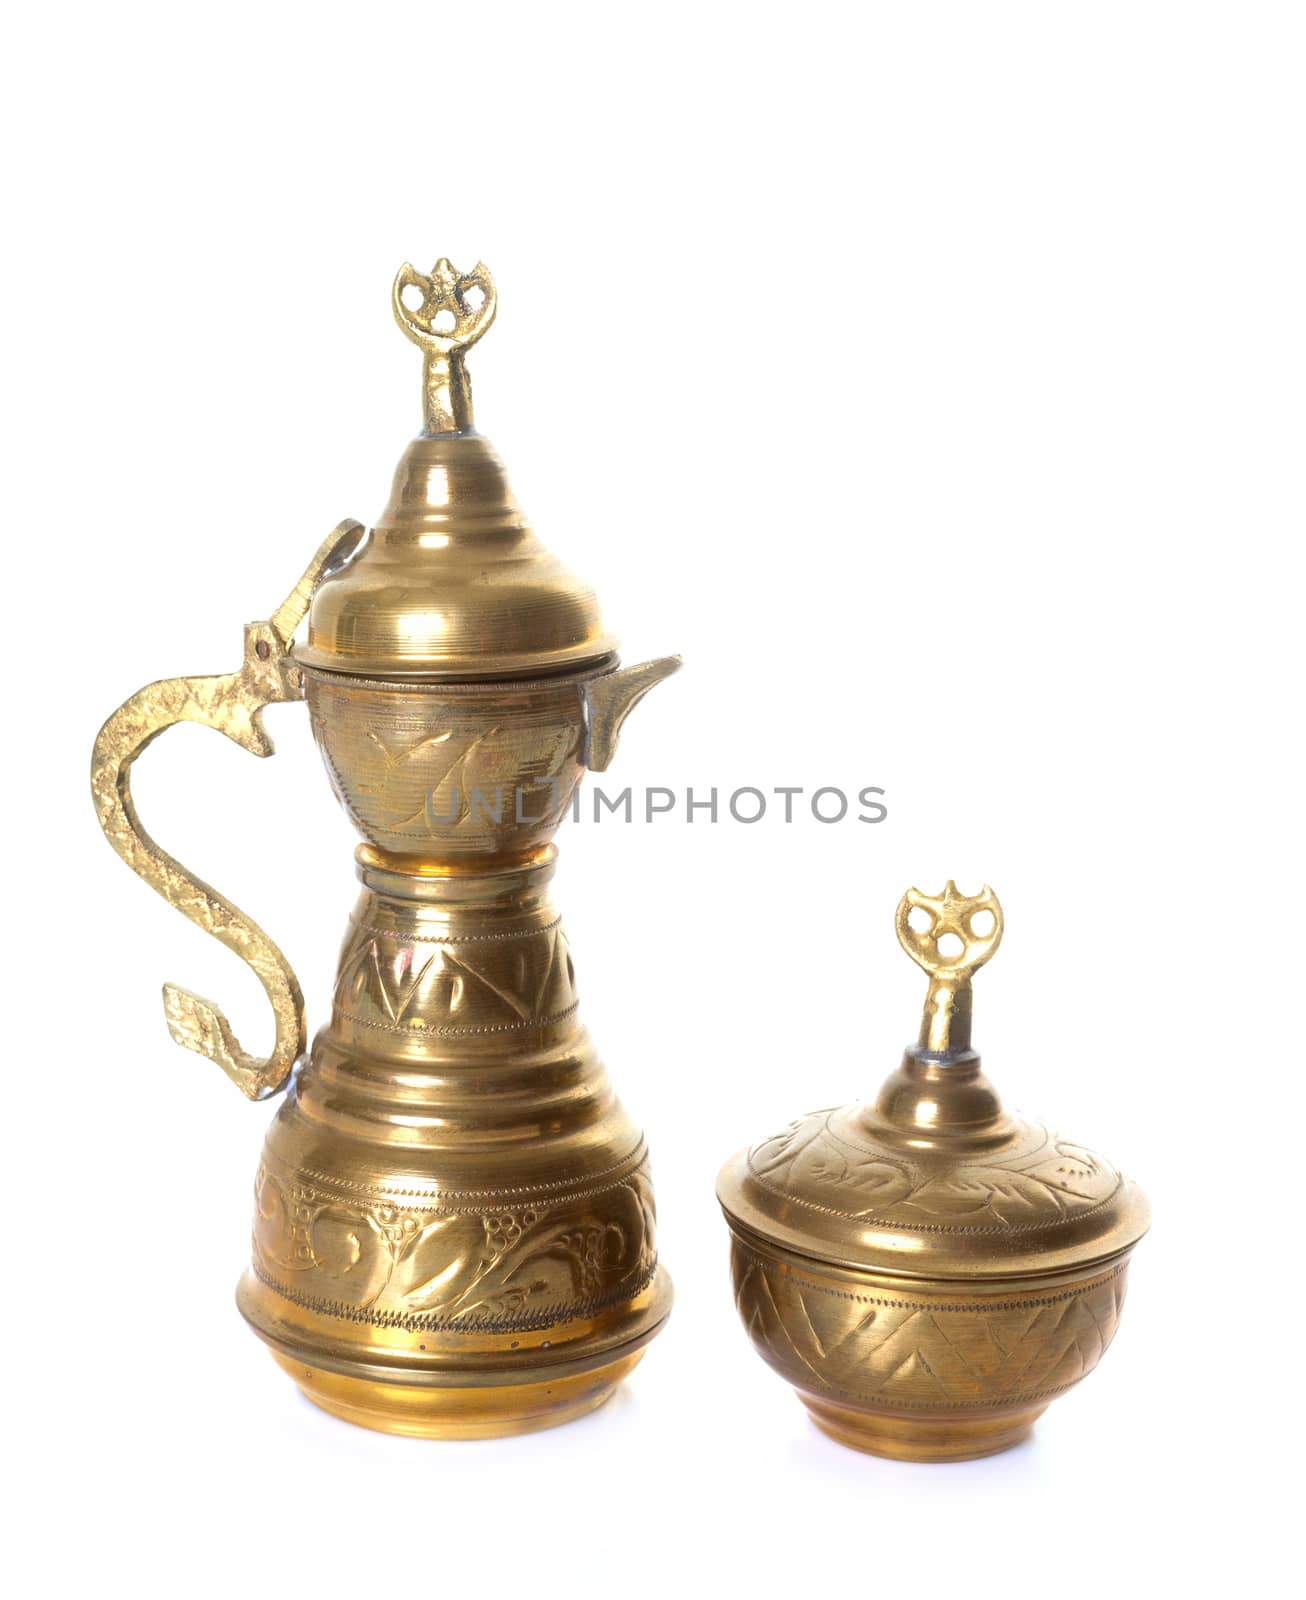 brass teapot in front of white background